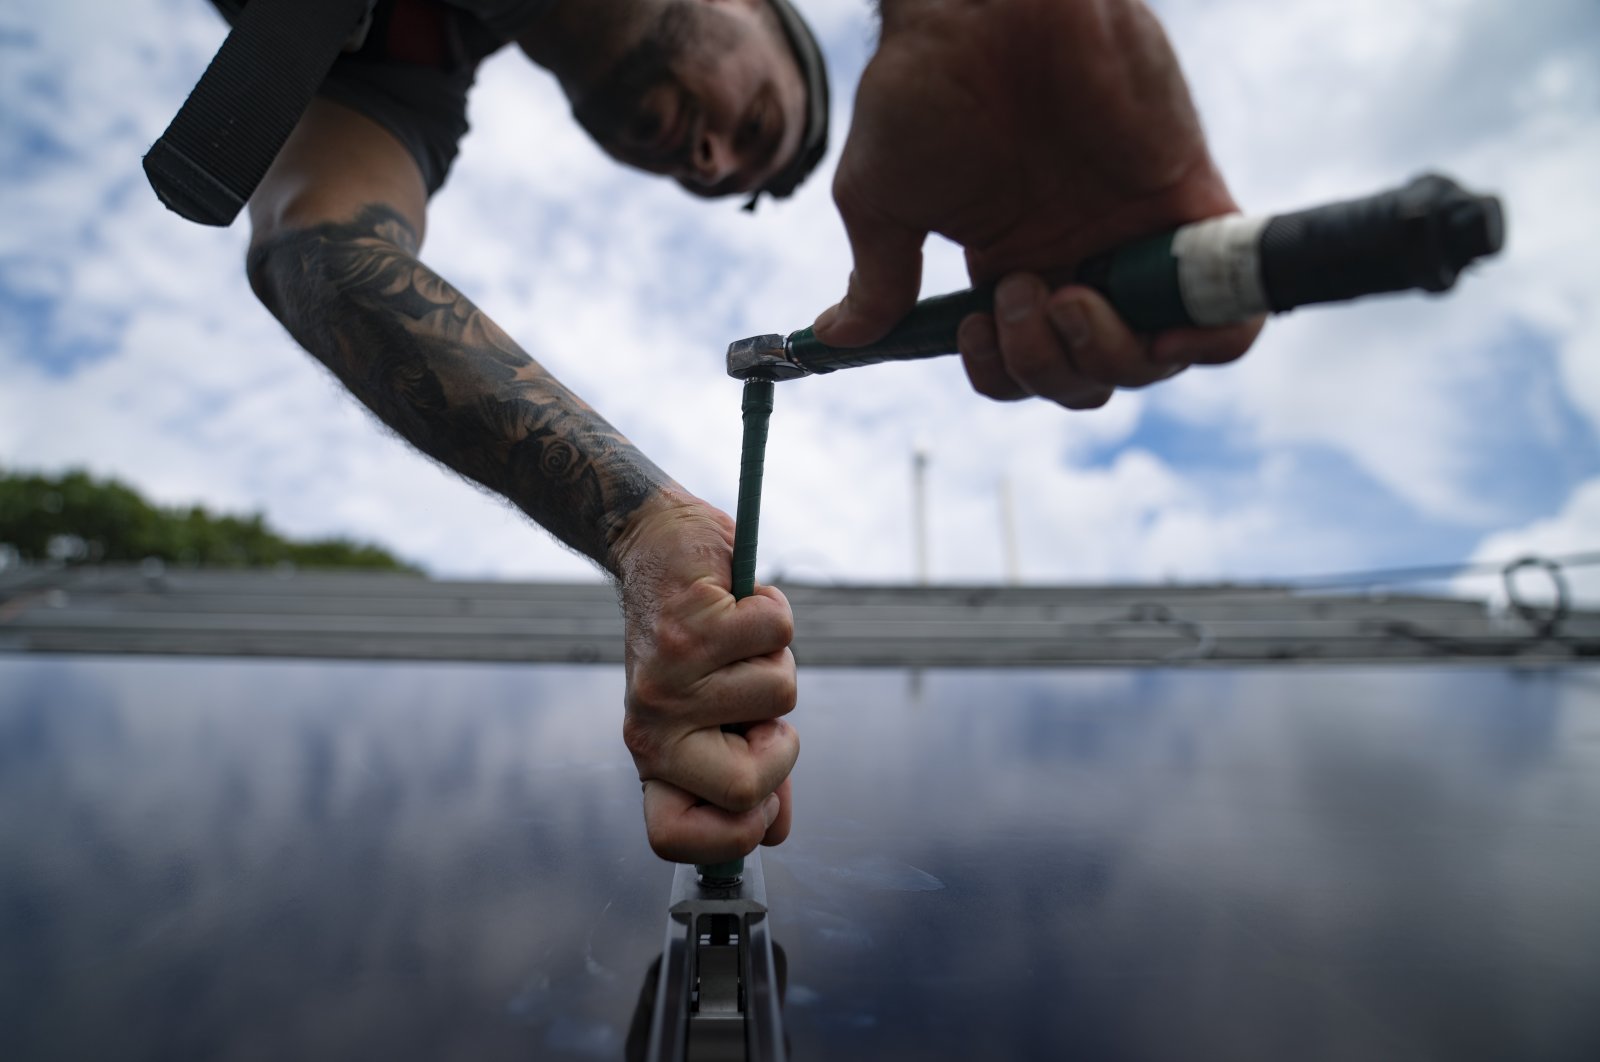 An employee of NY State Solar, a residential and commercial photovoltaic systems company, installs an array of solar panels on a roof, in the Long Island hamlet of Massapequa, N.Y., Aug. 11, 2022. (AP Photo)